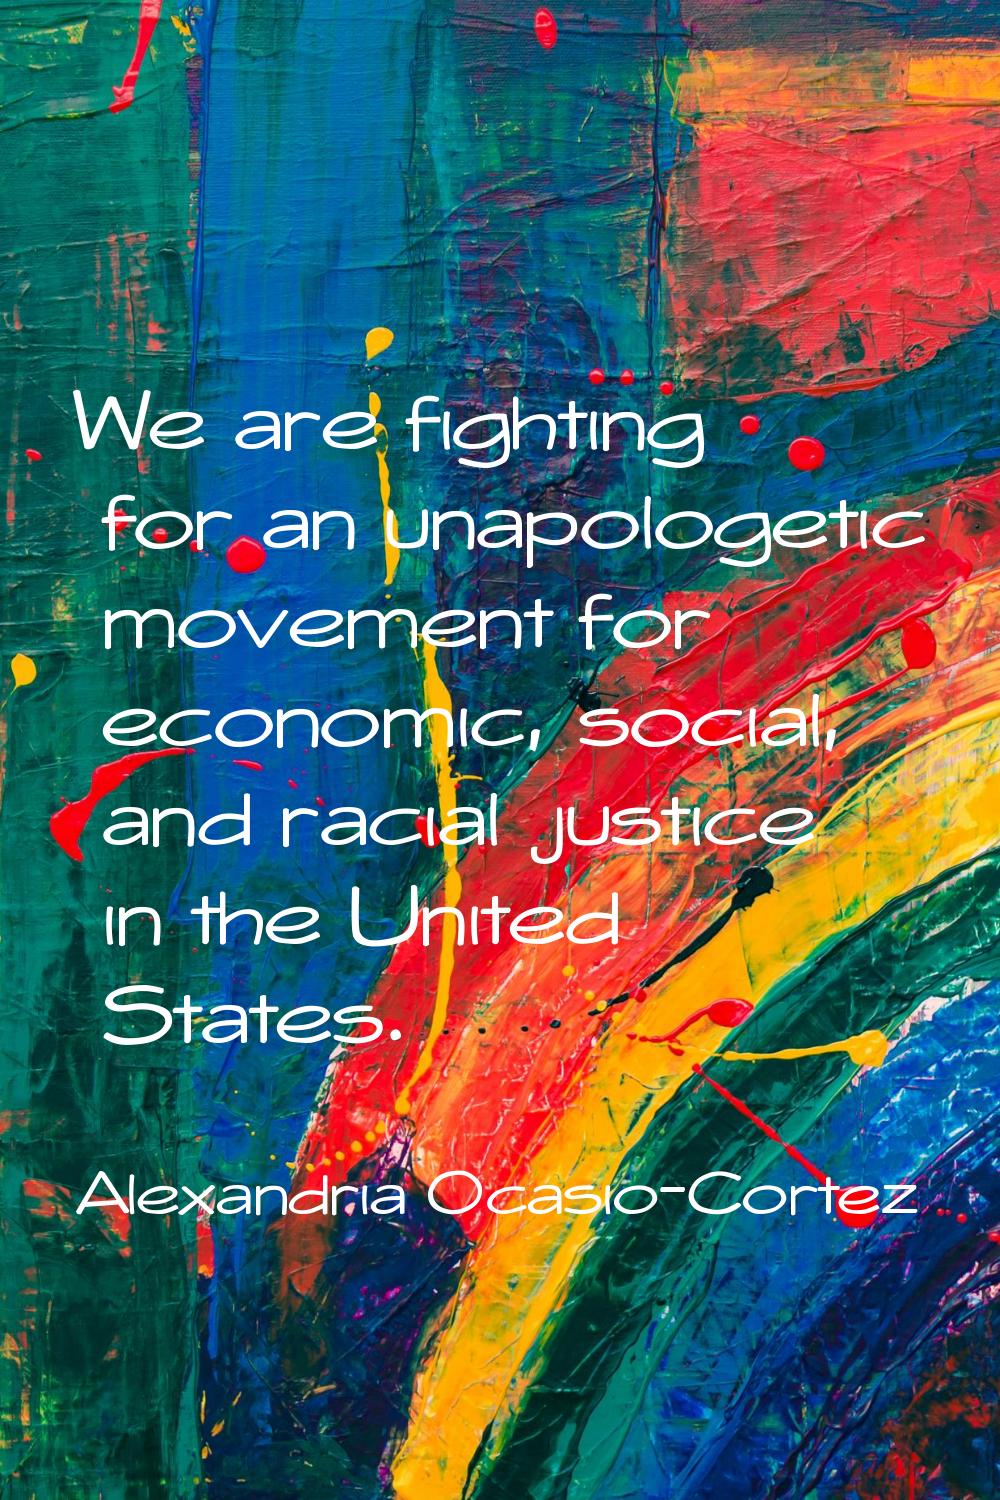 We are fighting for an unapologetic movement for economic, social, and racial justice in the United